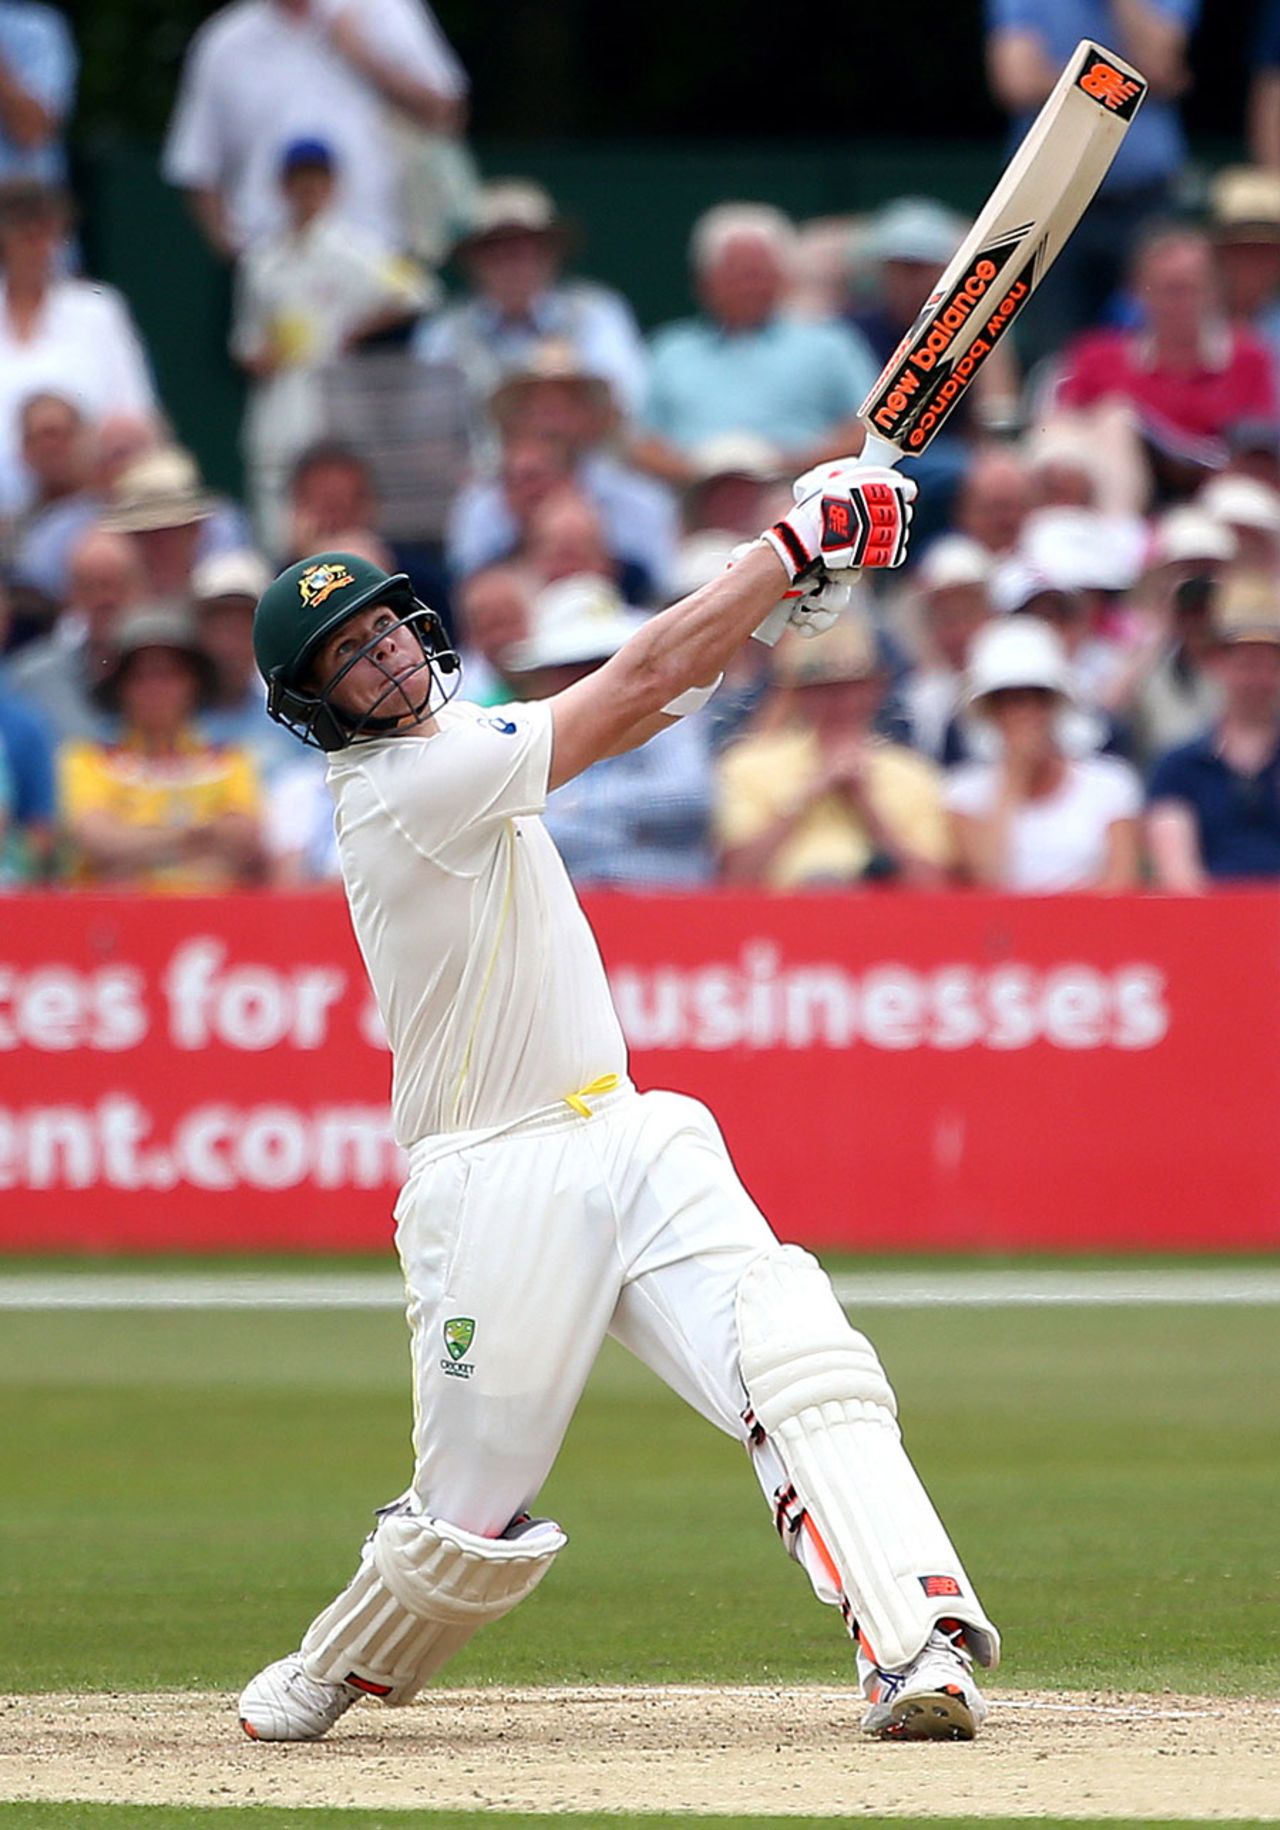 Steven Smith moved to 111 before retiring, Kent v Australians, Tour Match, Canterbury, 2nd day, June 26, 2015